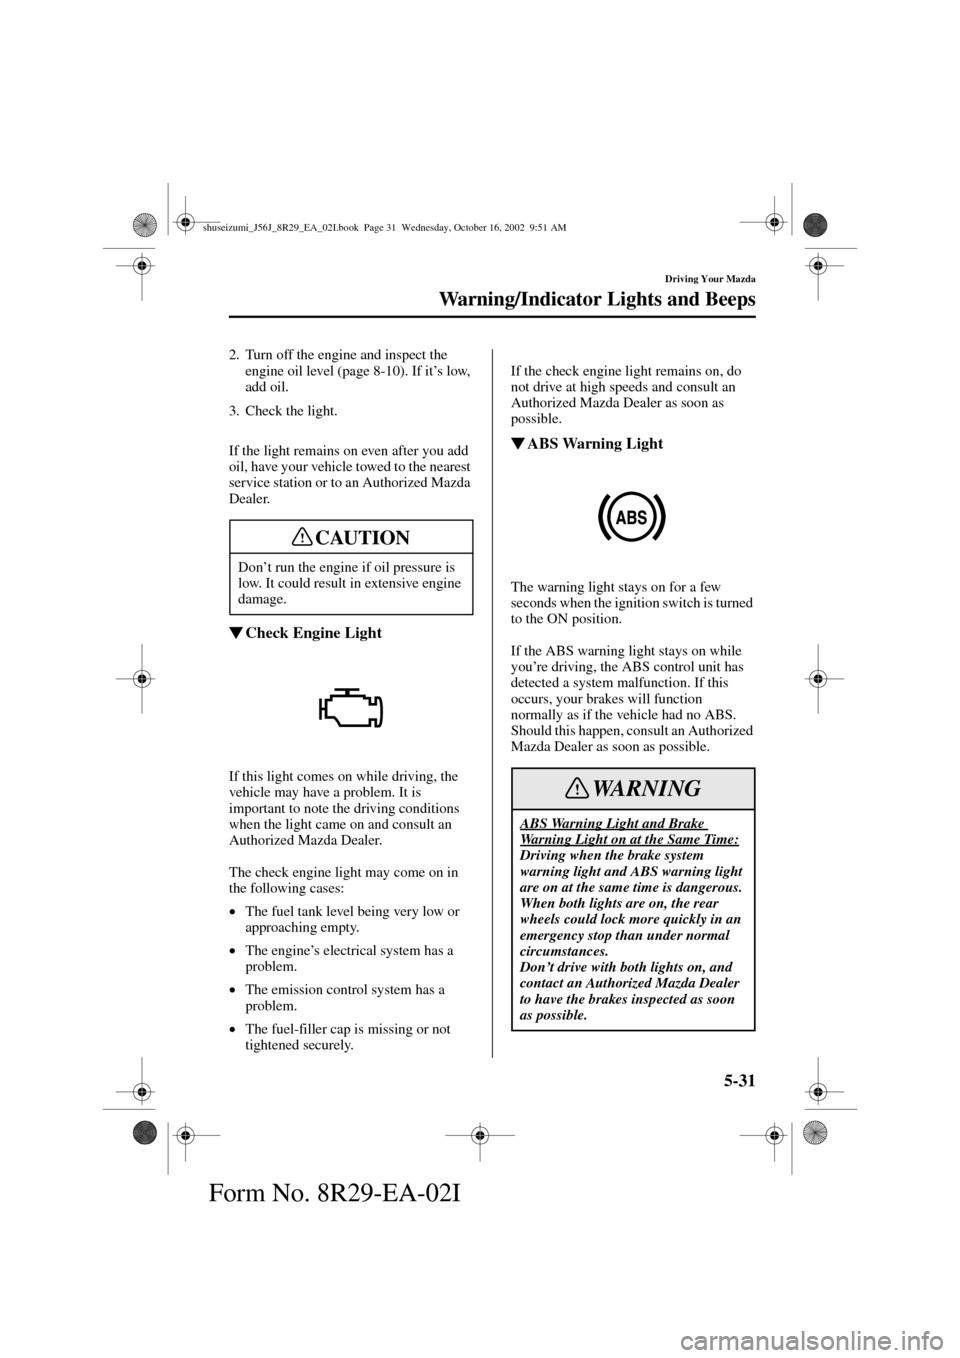 MAZDA MODEL 6 2003  Owners Manual (in English) 5-31
Driving Your Mazda
Warning/Indicator Lights and Beeps
Form No. 8R29-EA-02I
2. Turn off the engine and inspect the 
engine oil level (page 8-10). If it’s low, 
add oil.
3. Check the light.
If th